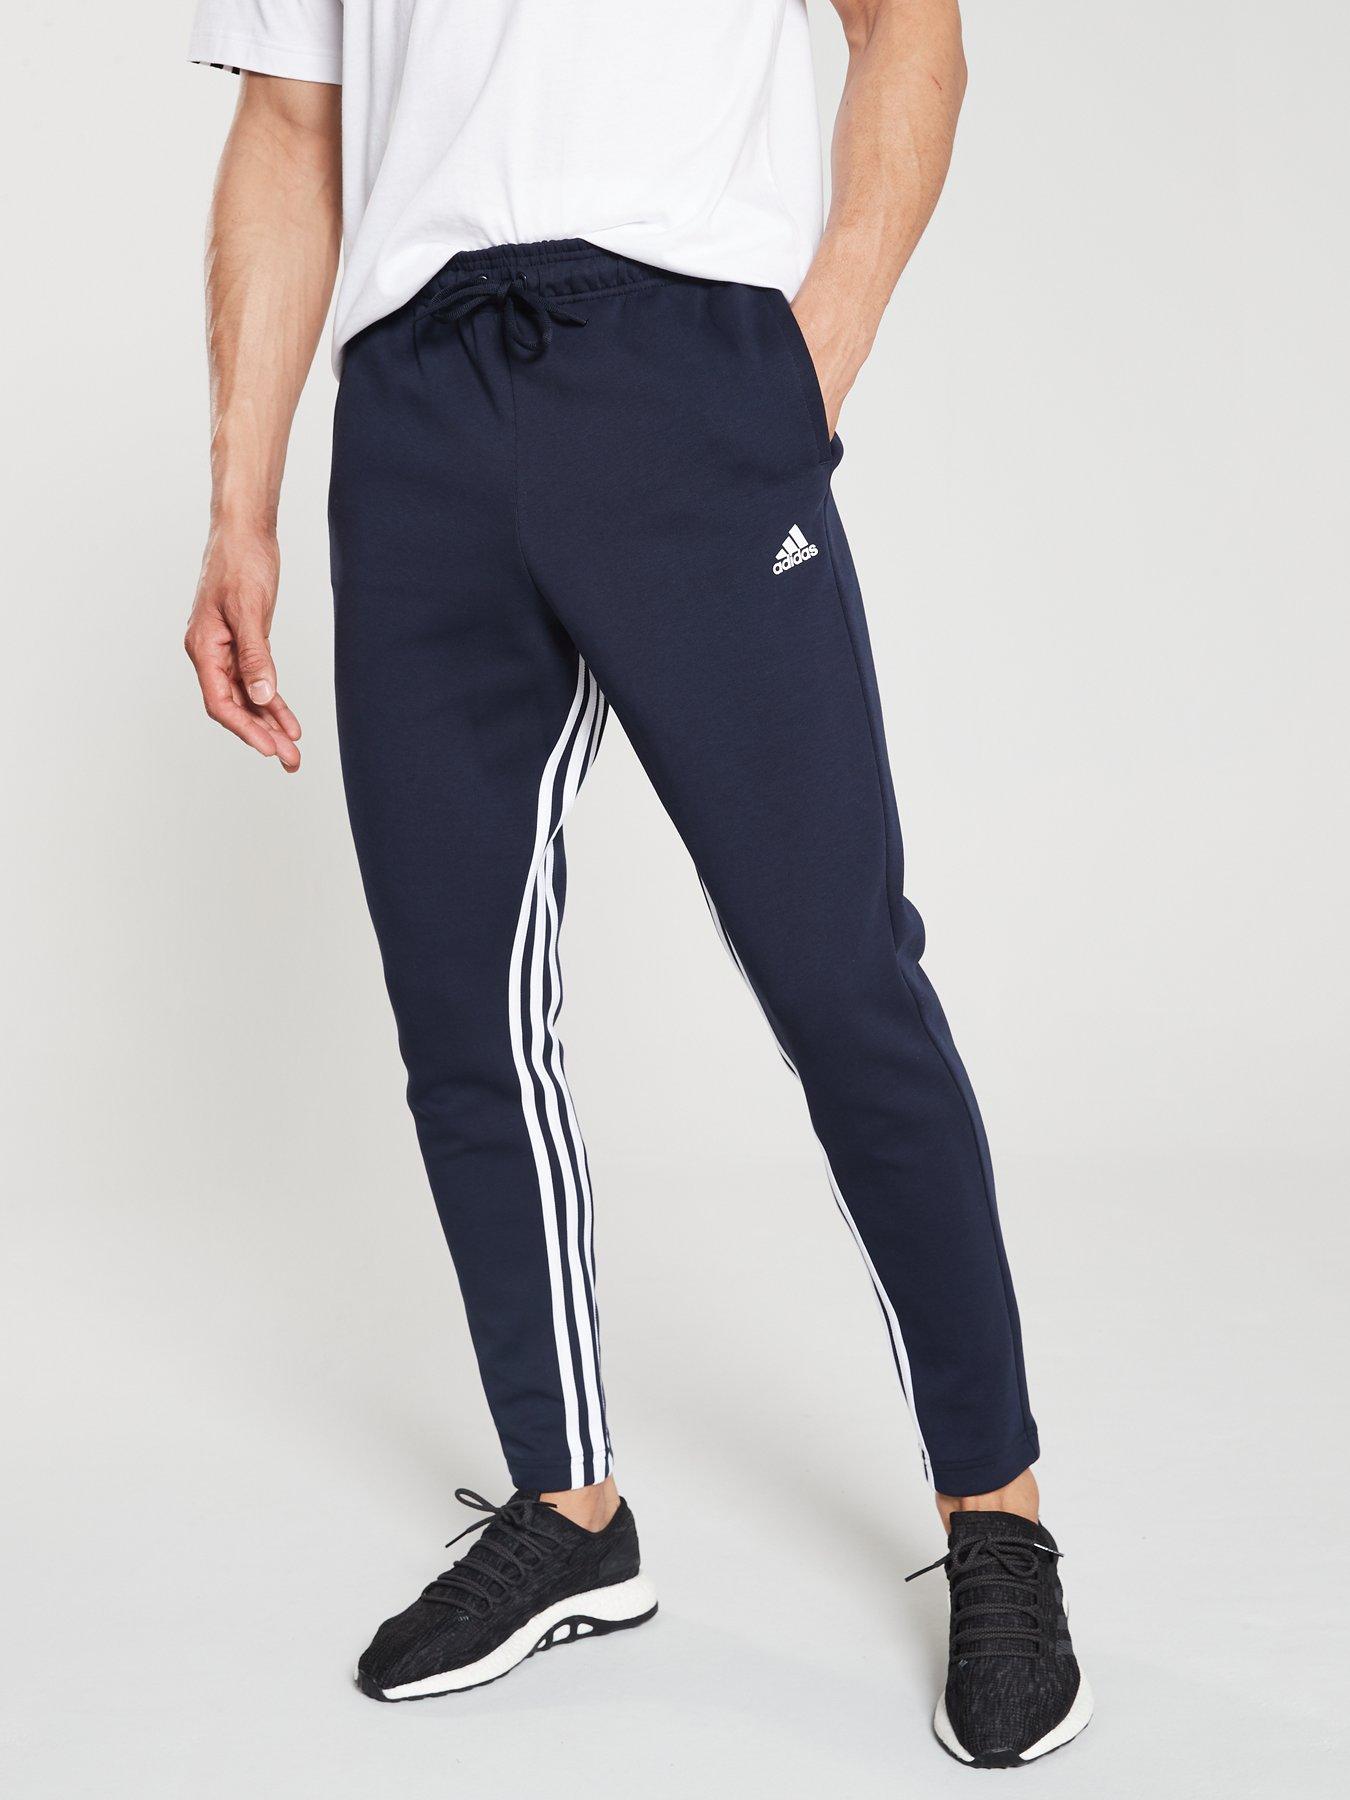 silk adidas joggers for sale 830c4 58d47